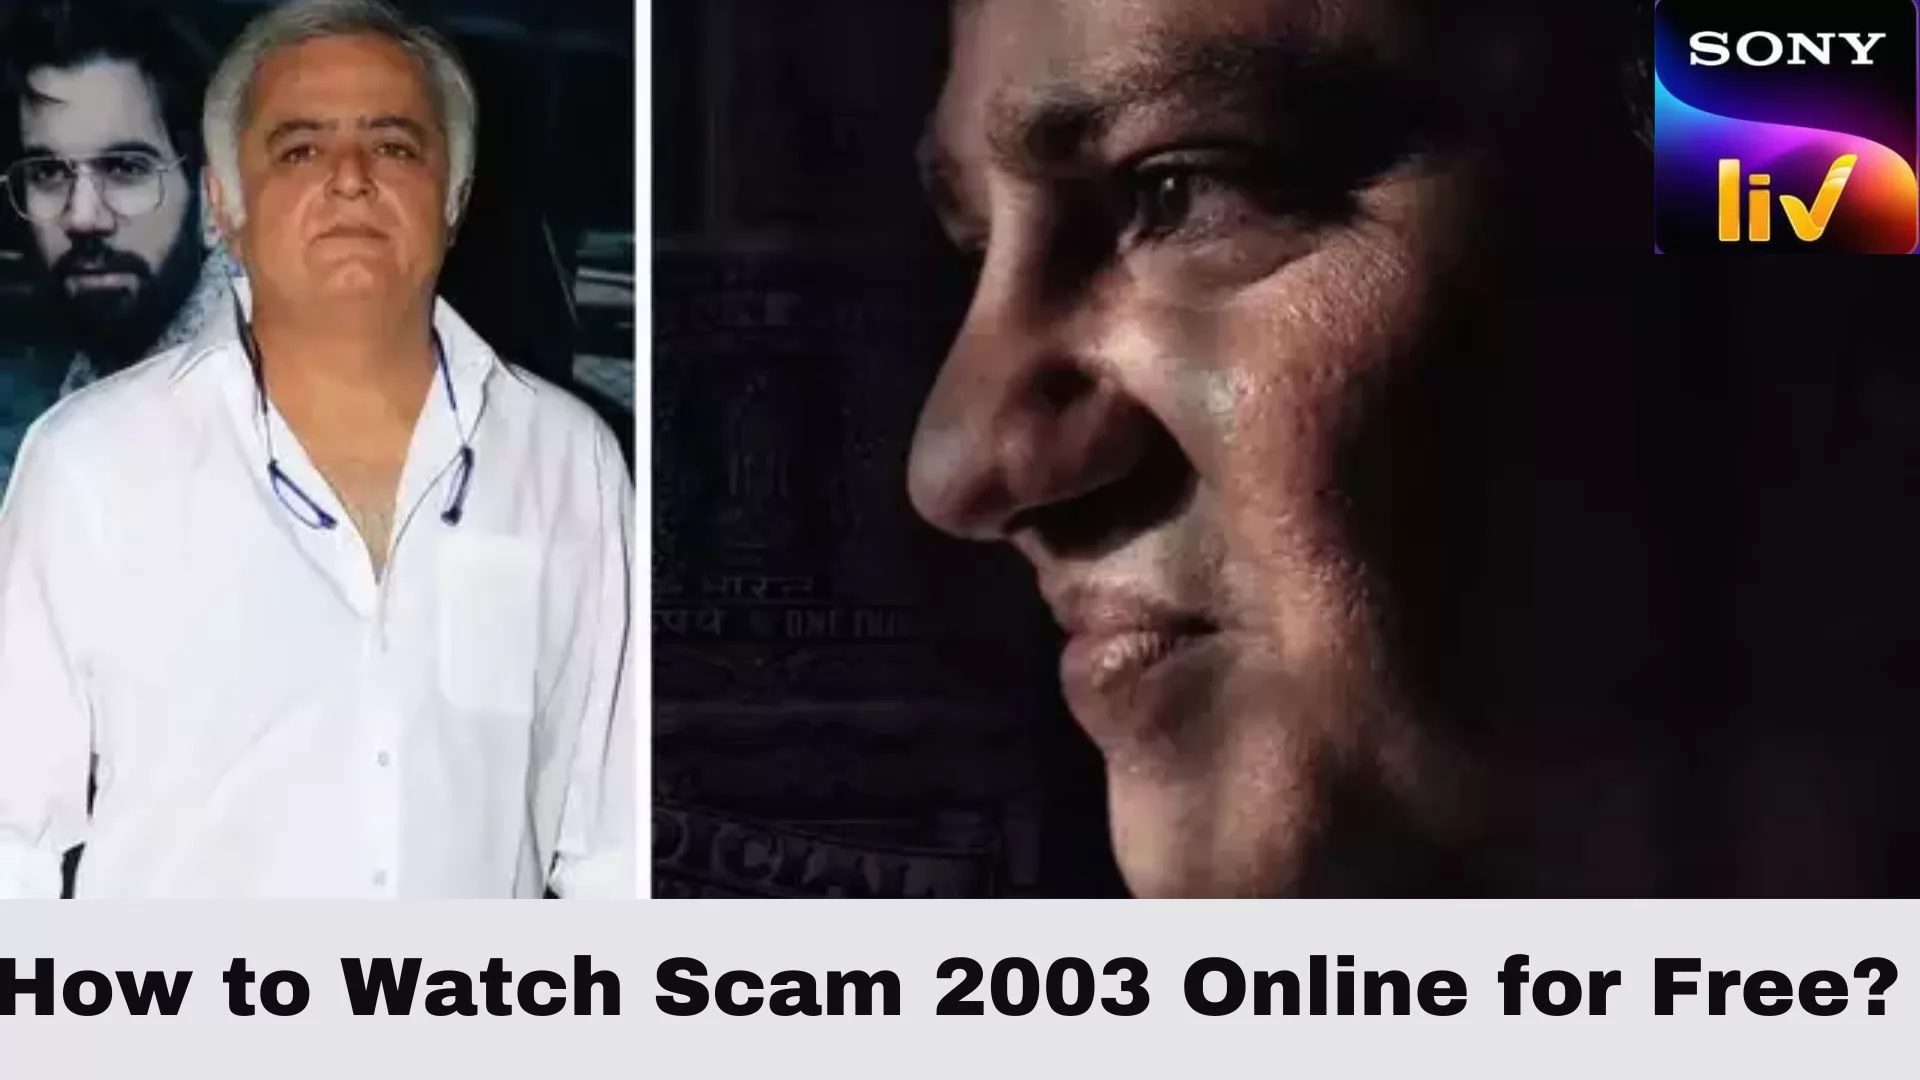 How to Watch Scam 2003 Online for Free? 